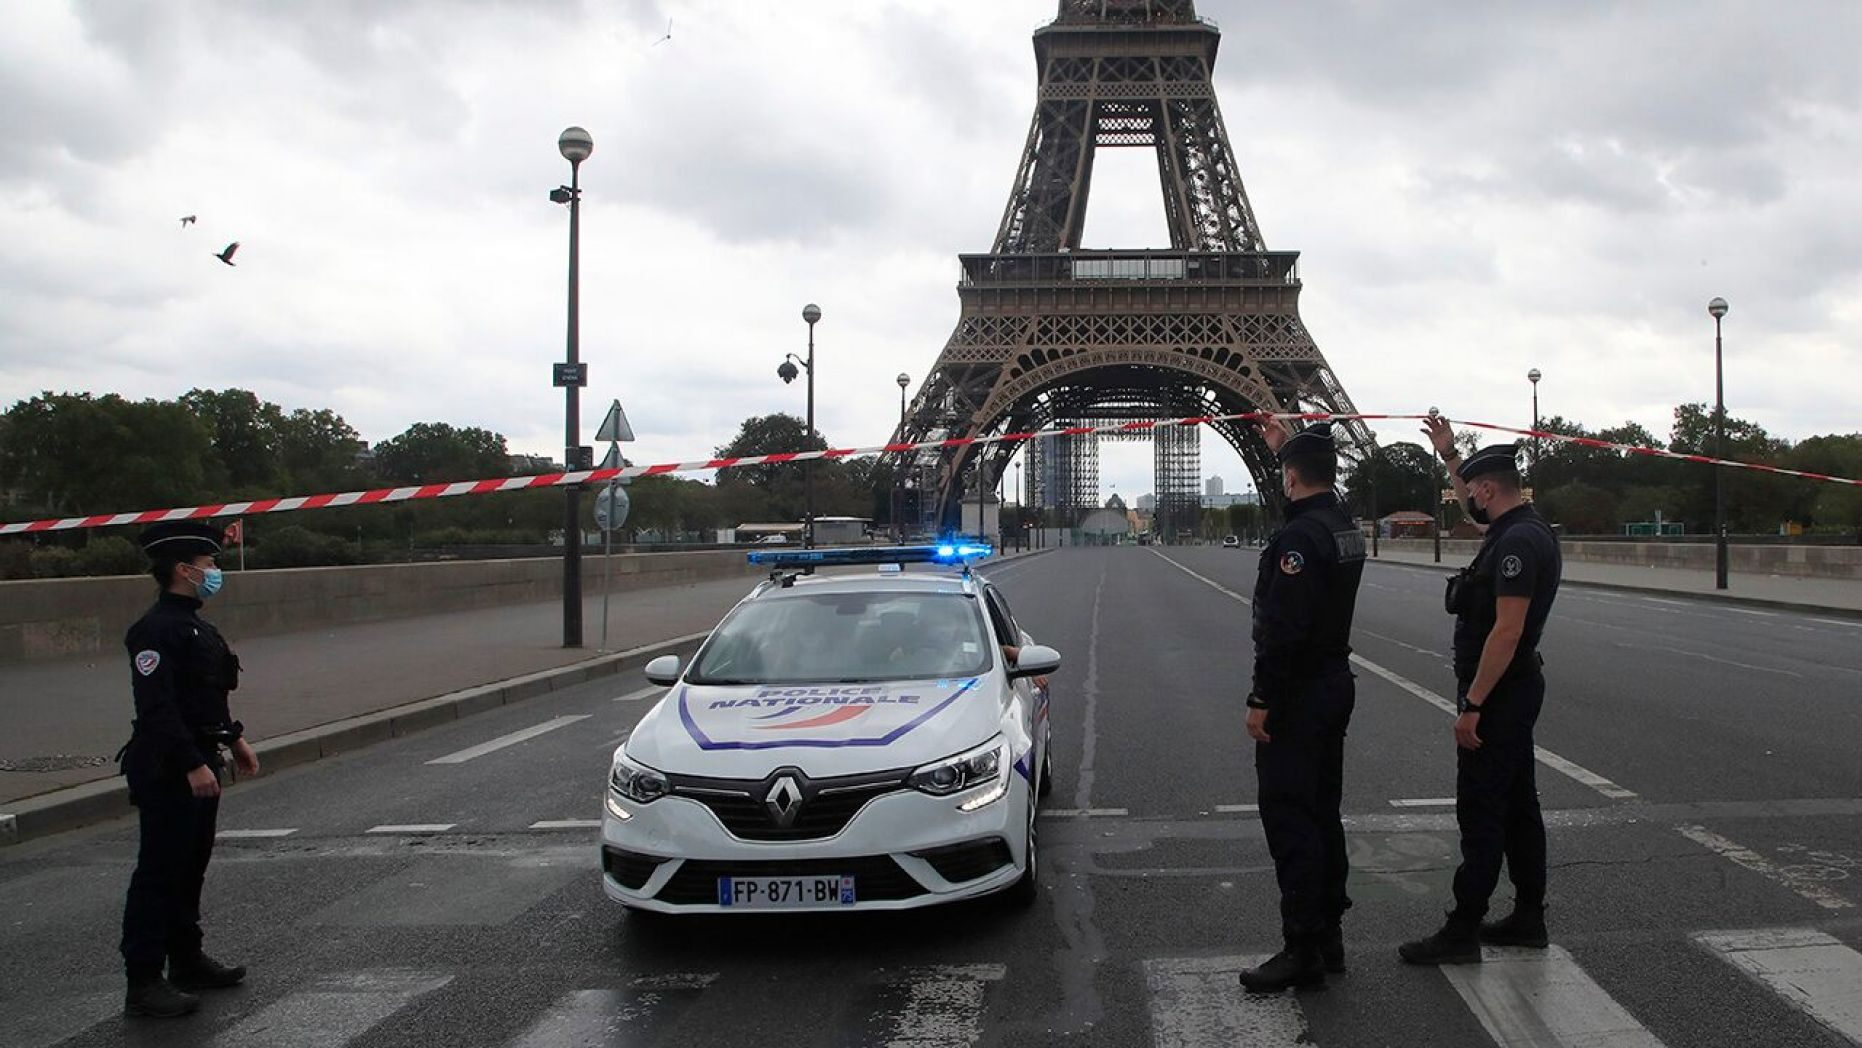 Eiffel Tower briefly evacuated after bomb hoax